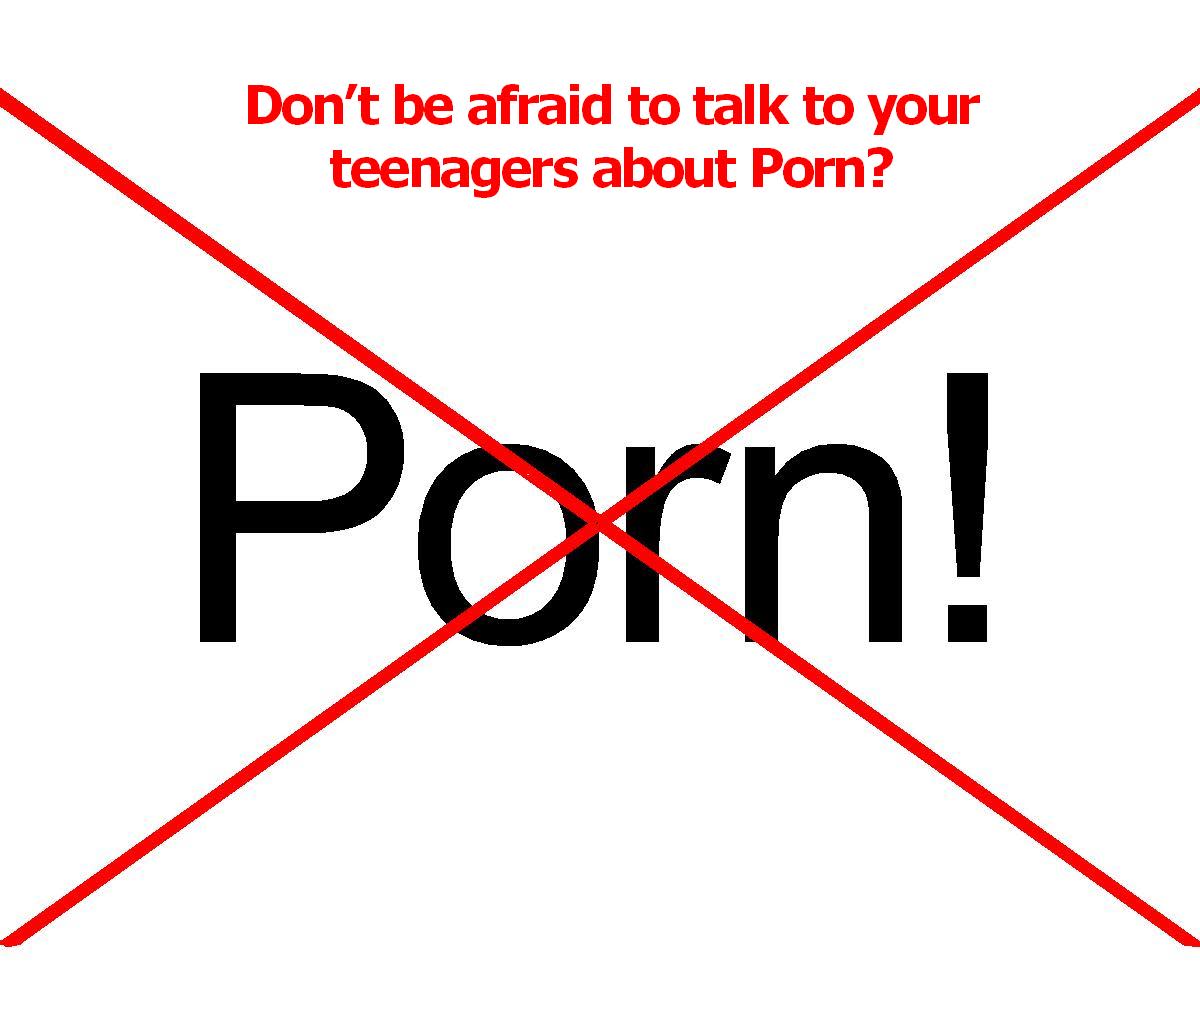 Don't be afraid to talk to your teenagers about porn!